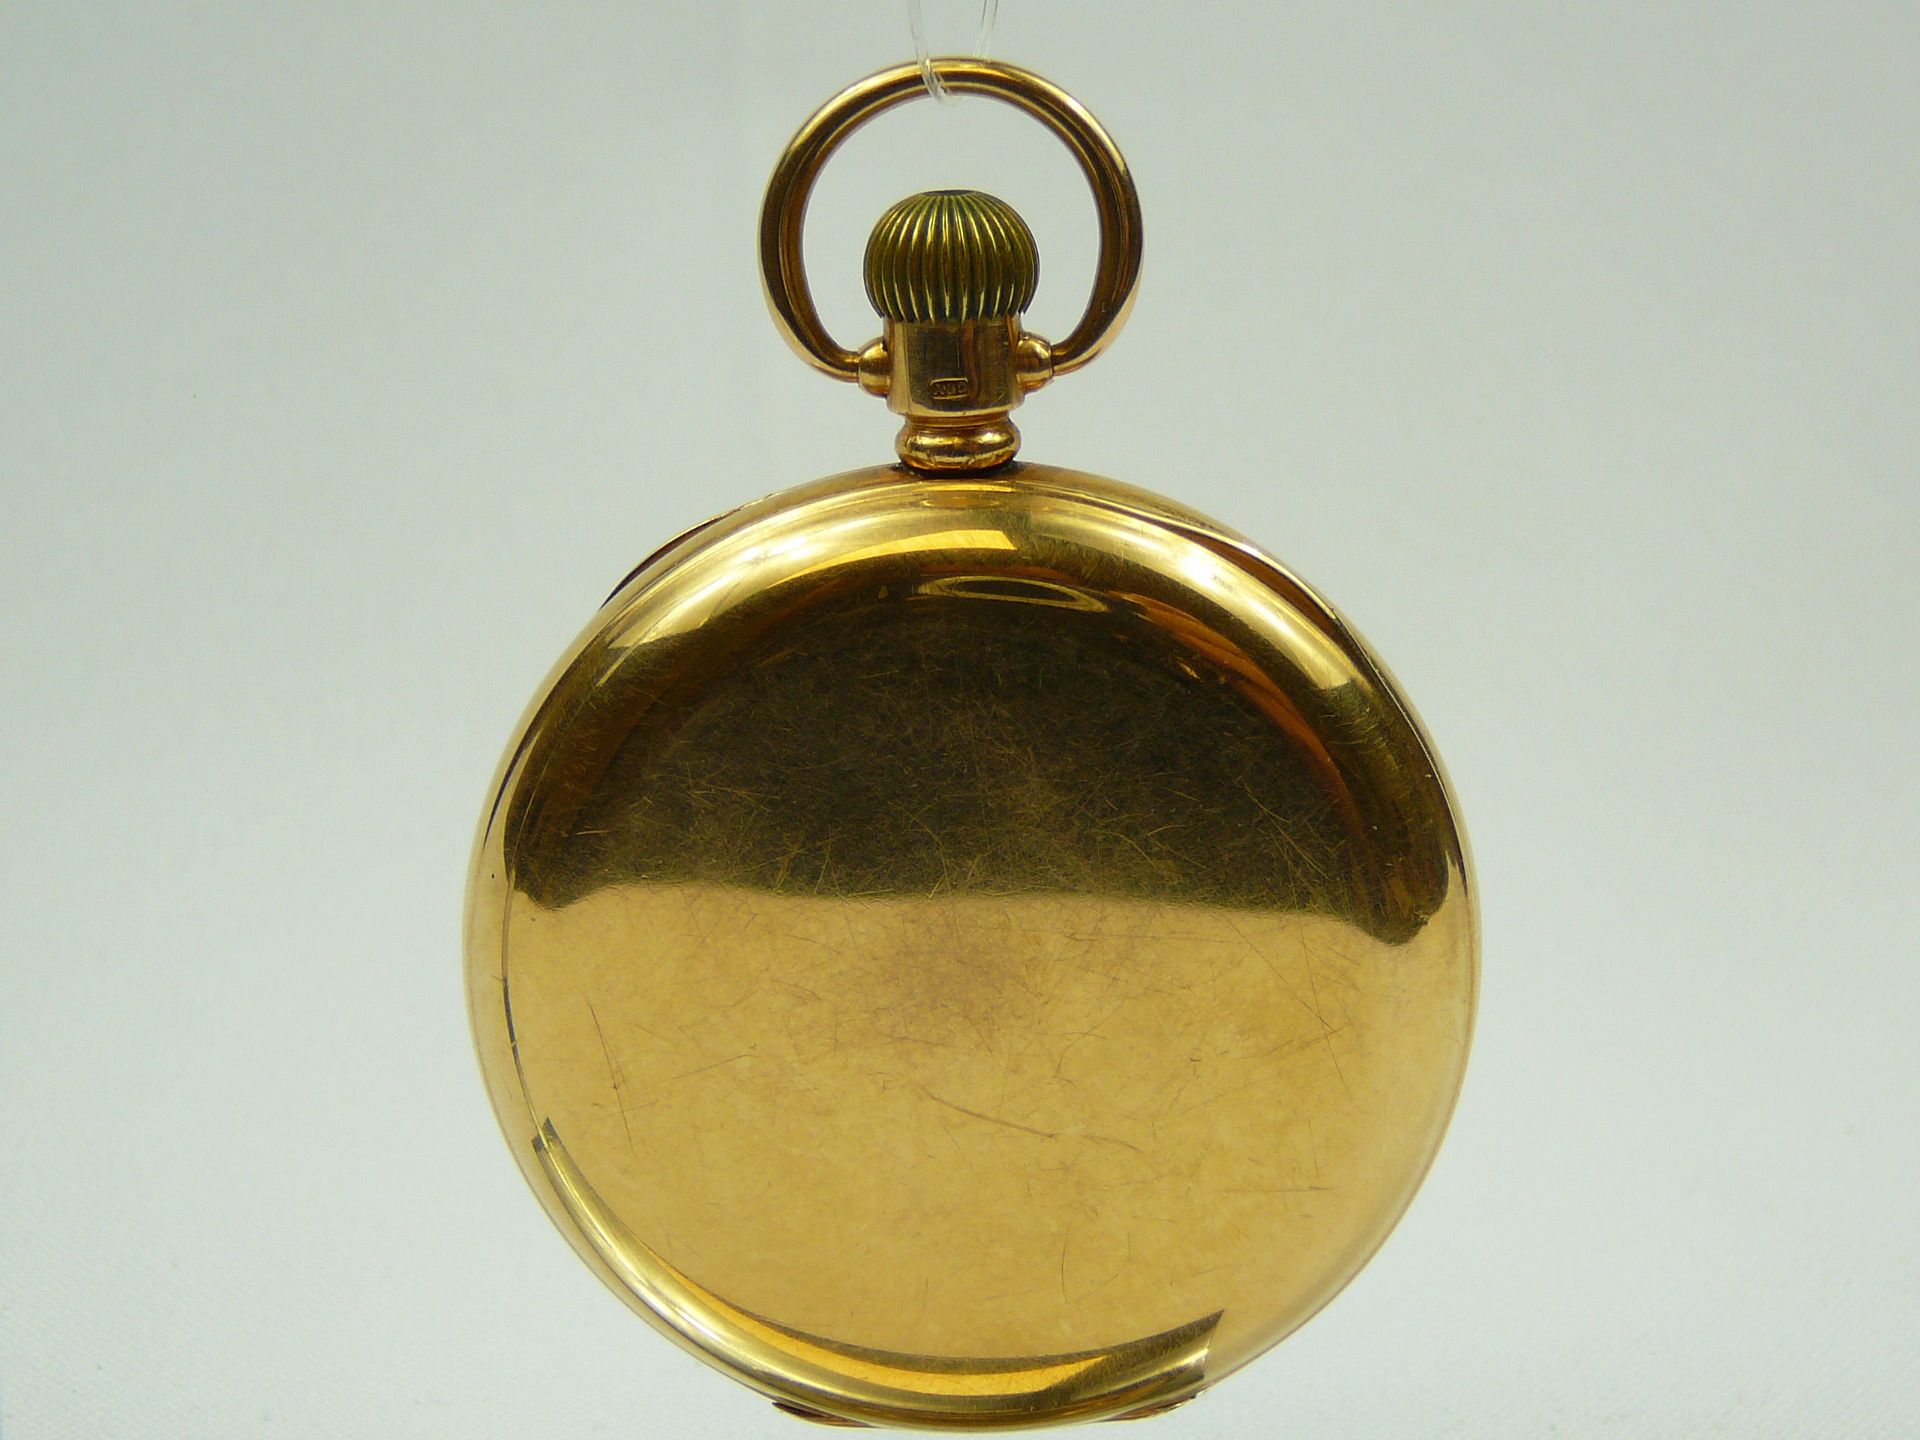 Gents gold pocket watch - Image 2 of 7